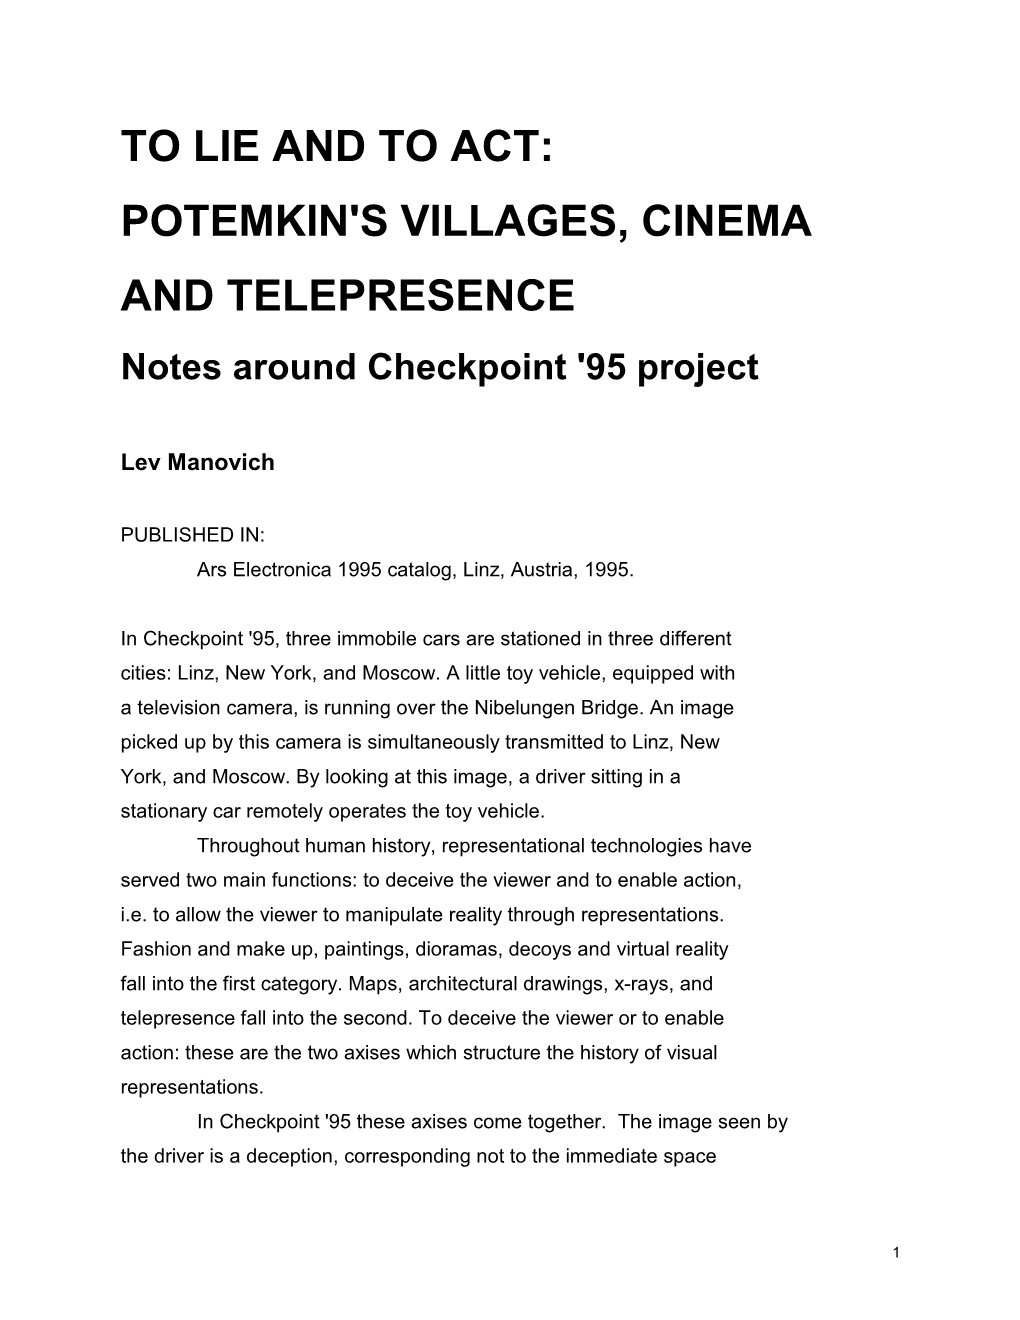 TO LIE and to ACT: POTEMKIN's VILLAGES, CINEMA and TELEPRESENCE Notes Around Checkpoint '95 Project